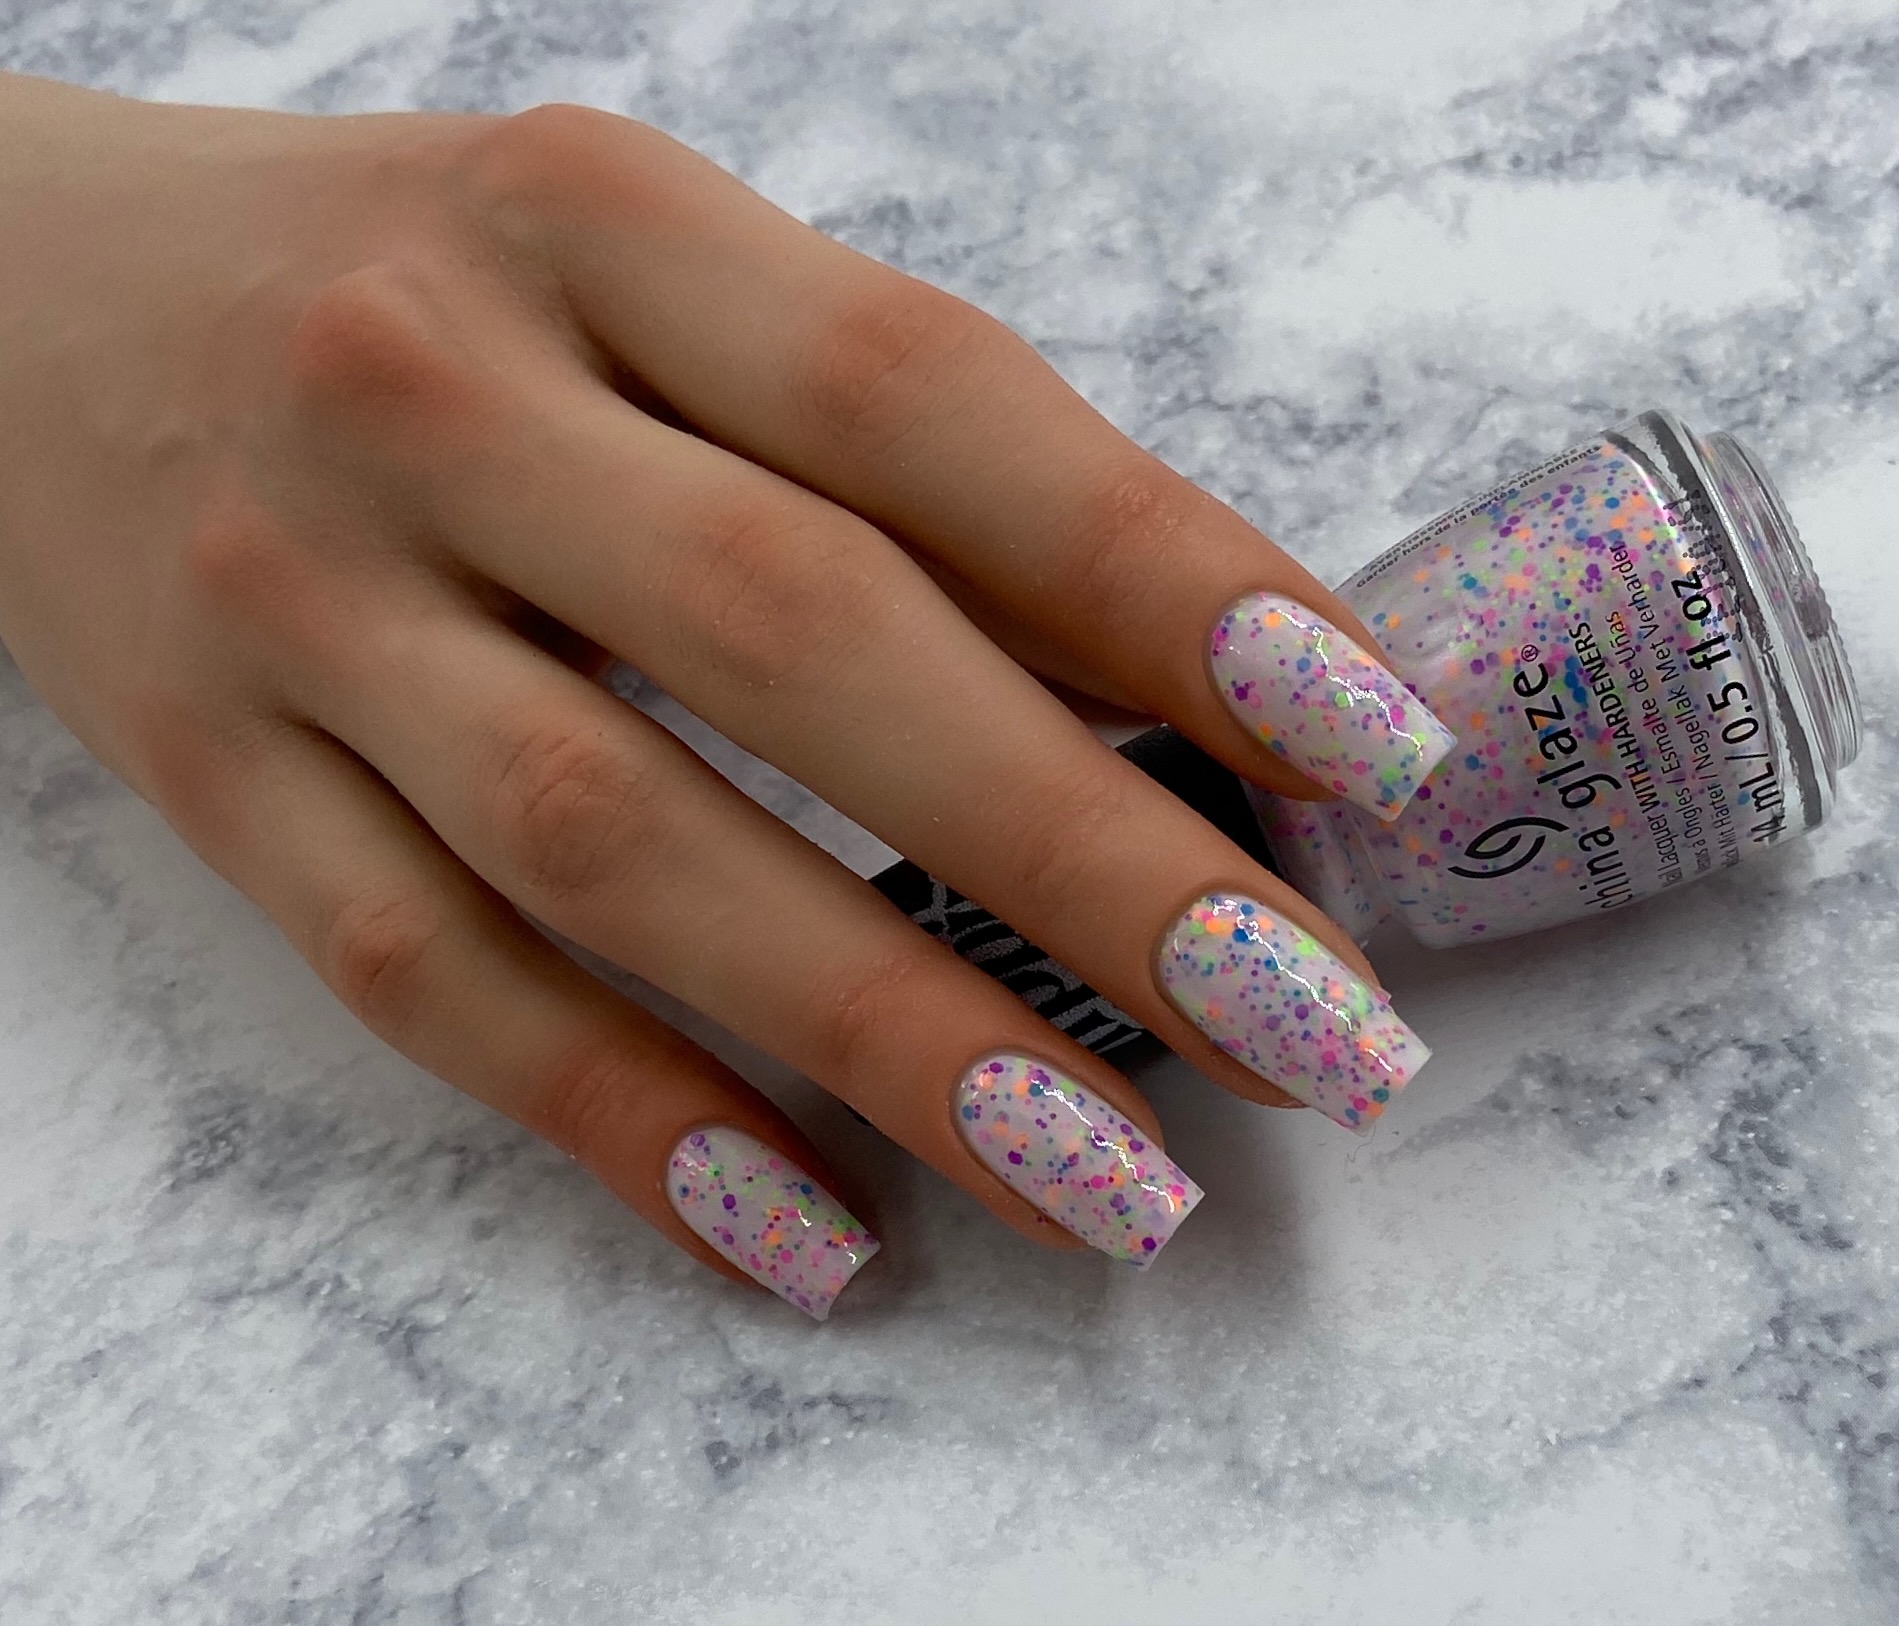 China Glaze Dippin' Dots Collection Swatch and Review -